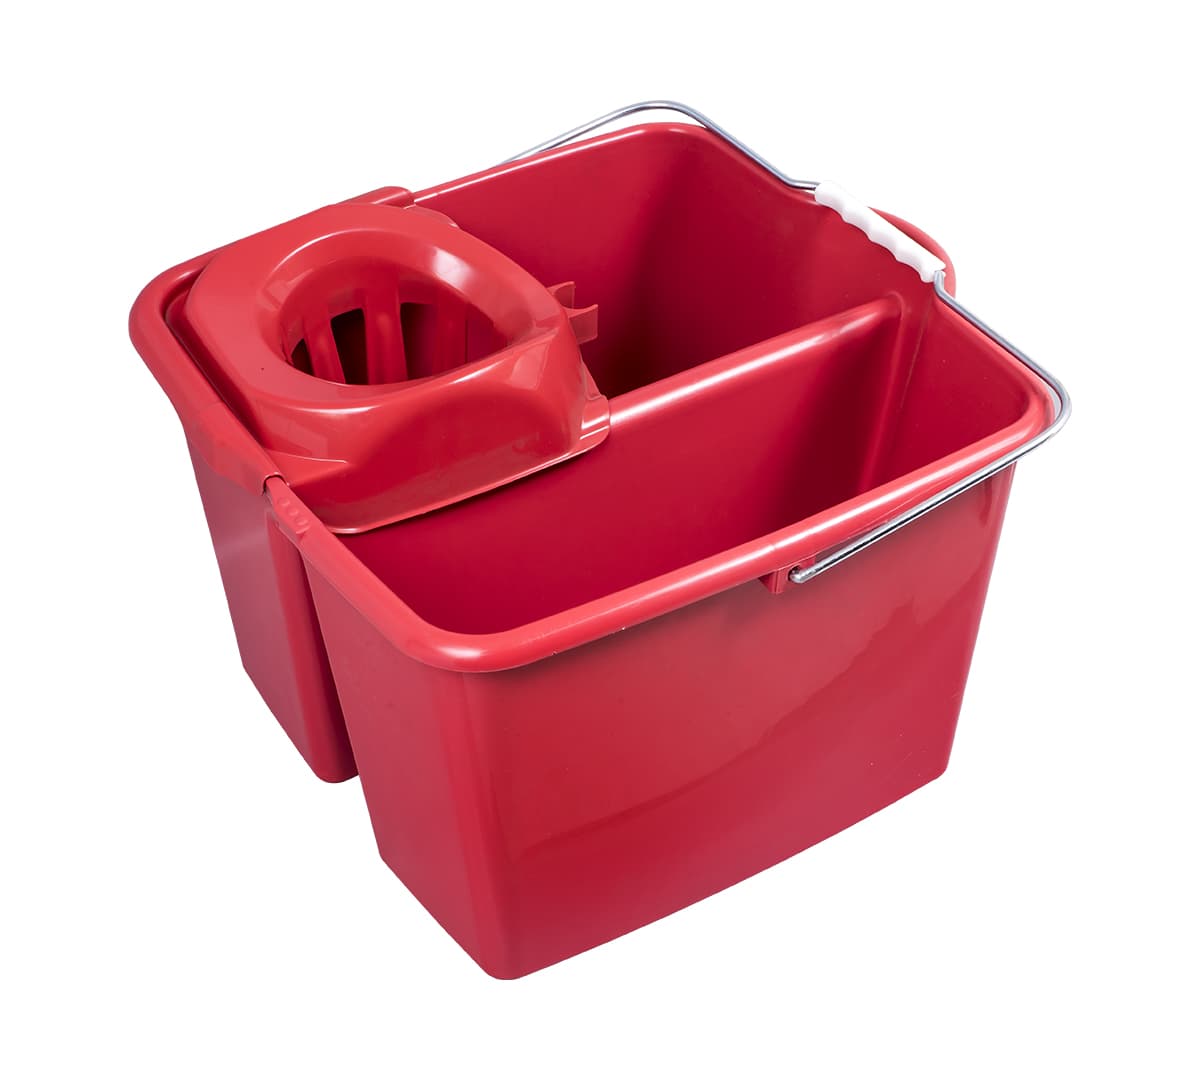 Clean & Rinse Bucket with Wringer